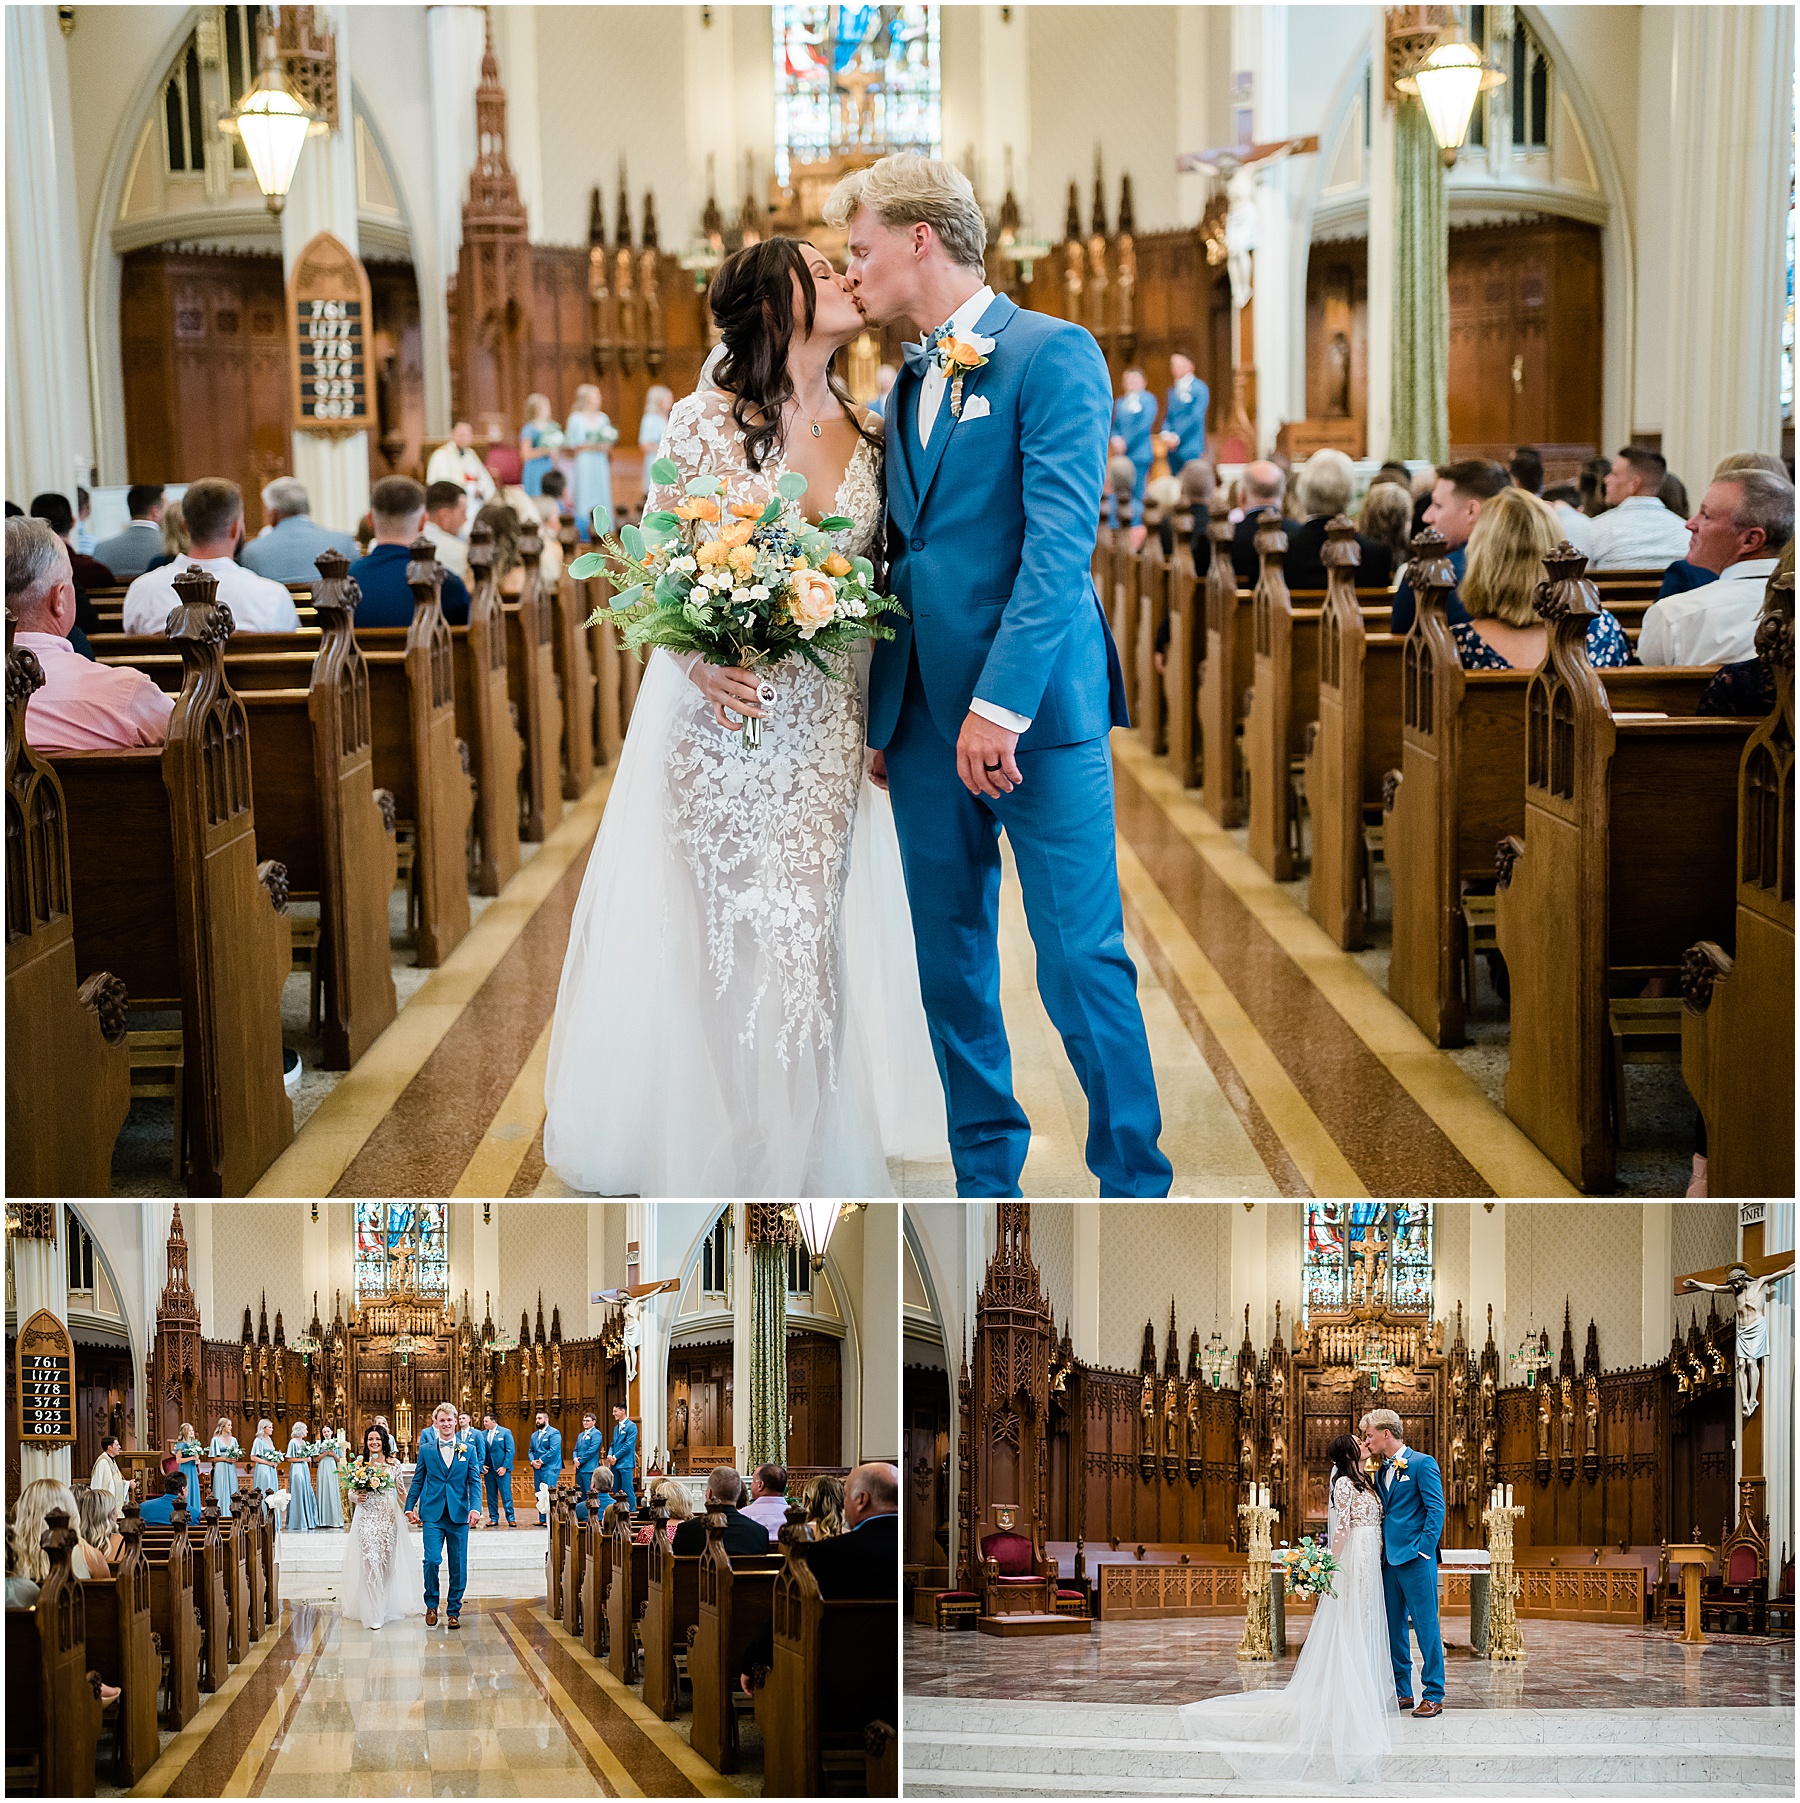 Fort Wayne wedding photographer capture bride and groom kissing as they walk down the aisle